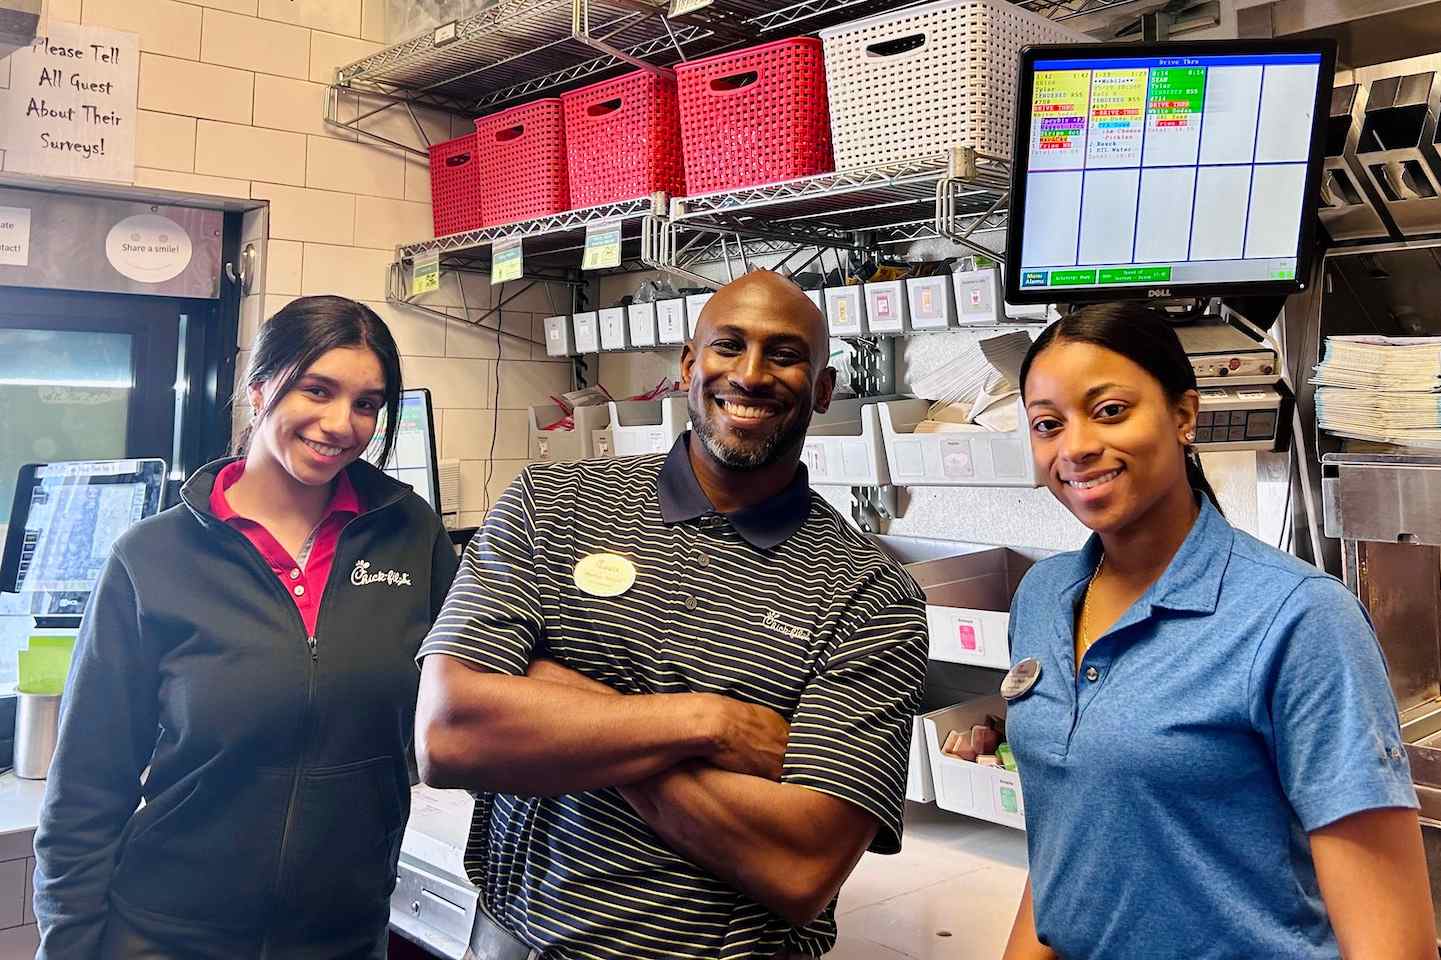  Operator Marlon standing with two Team Members